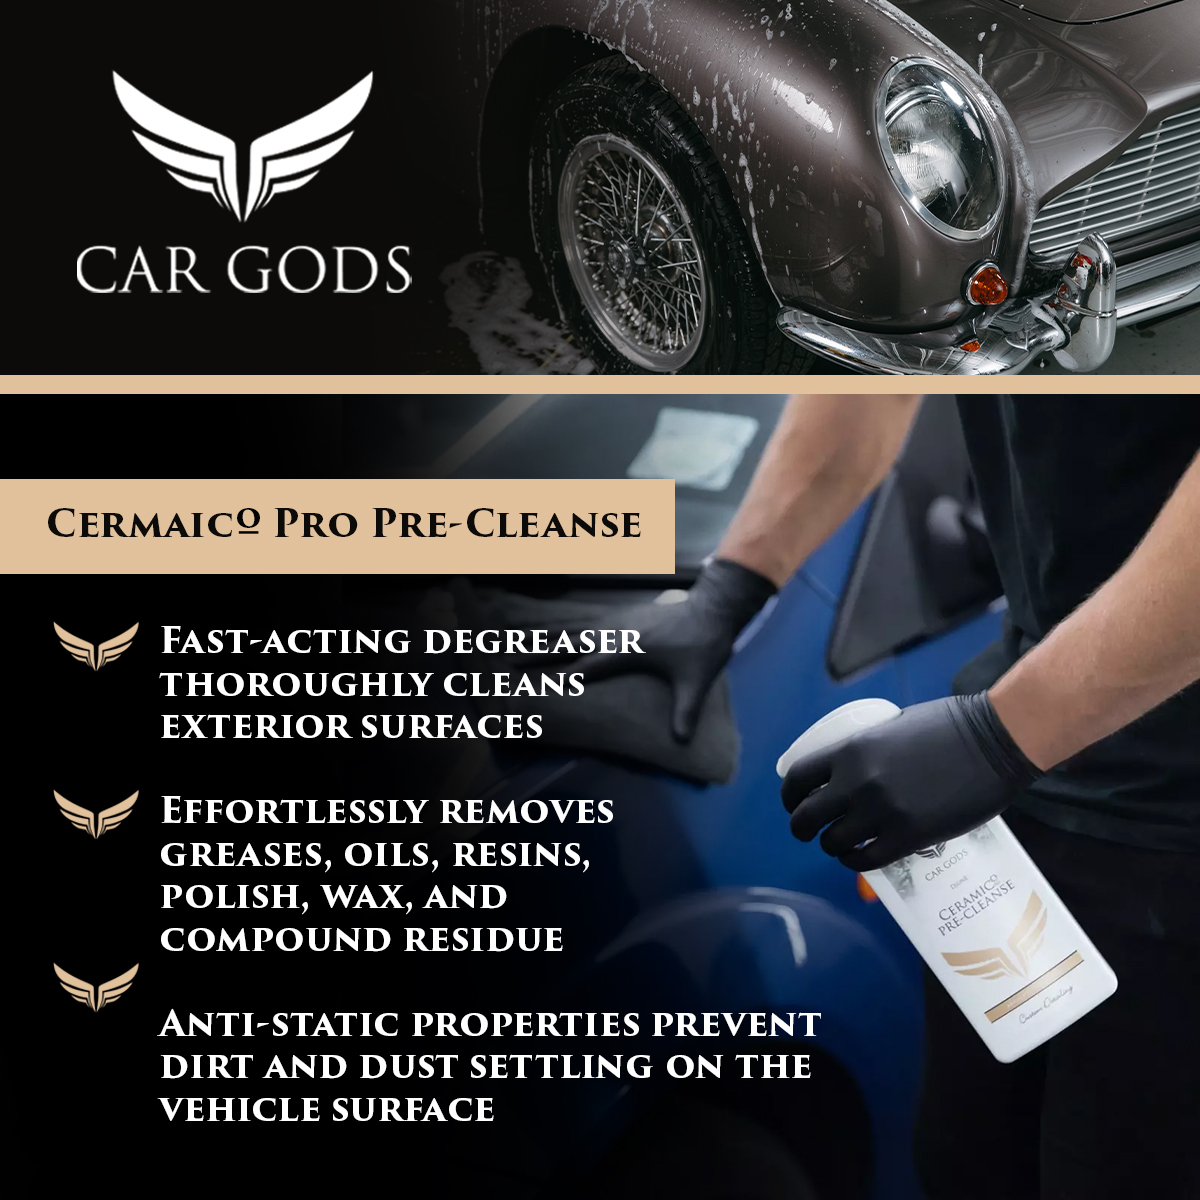 Car Gods Ceramico Pro Pre-Cleanse. Fast-acting degreaser to effortlessly remove greases, oils, resins, polish, wax, and compound residue. The anti-static properties of Ceramico Pro Pre-Cleanse prevent dirt and dust settling on the vehicle surface, making paintwork ready for Ceramico Pro Ceramic Coating after use.